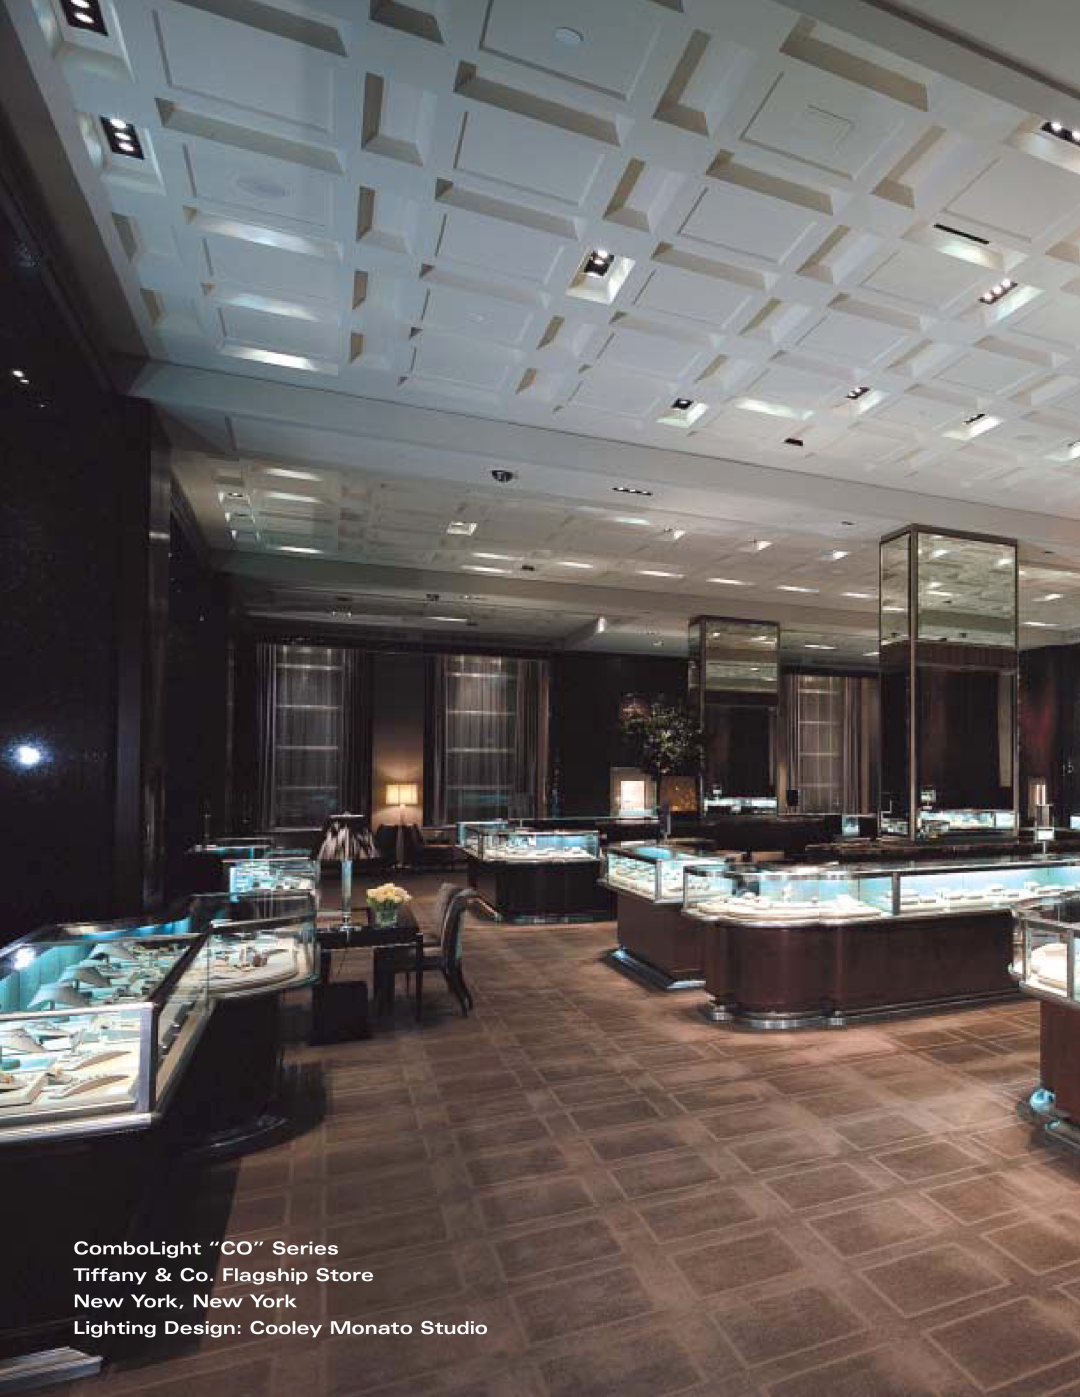 Cooper Lighting none manual ComboLight “CO” Series, Tiffany & Co. Flagship Store New York, New York 